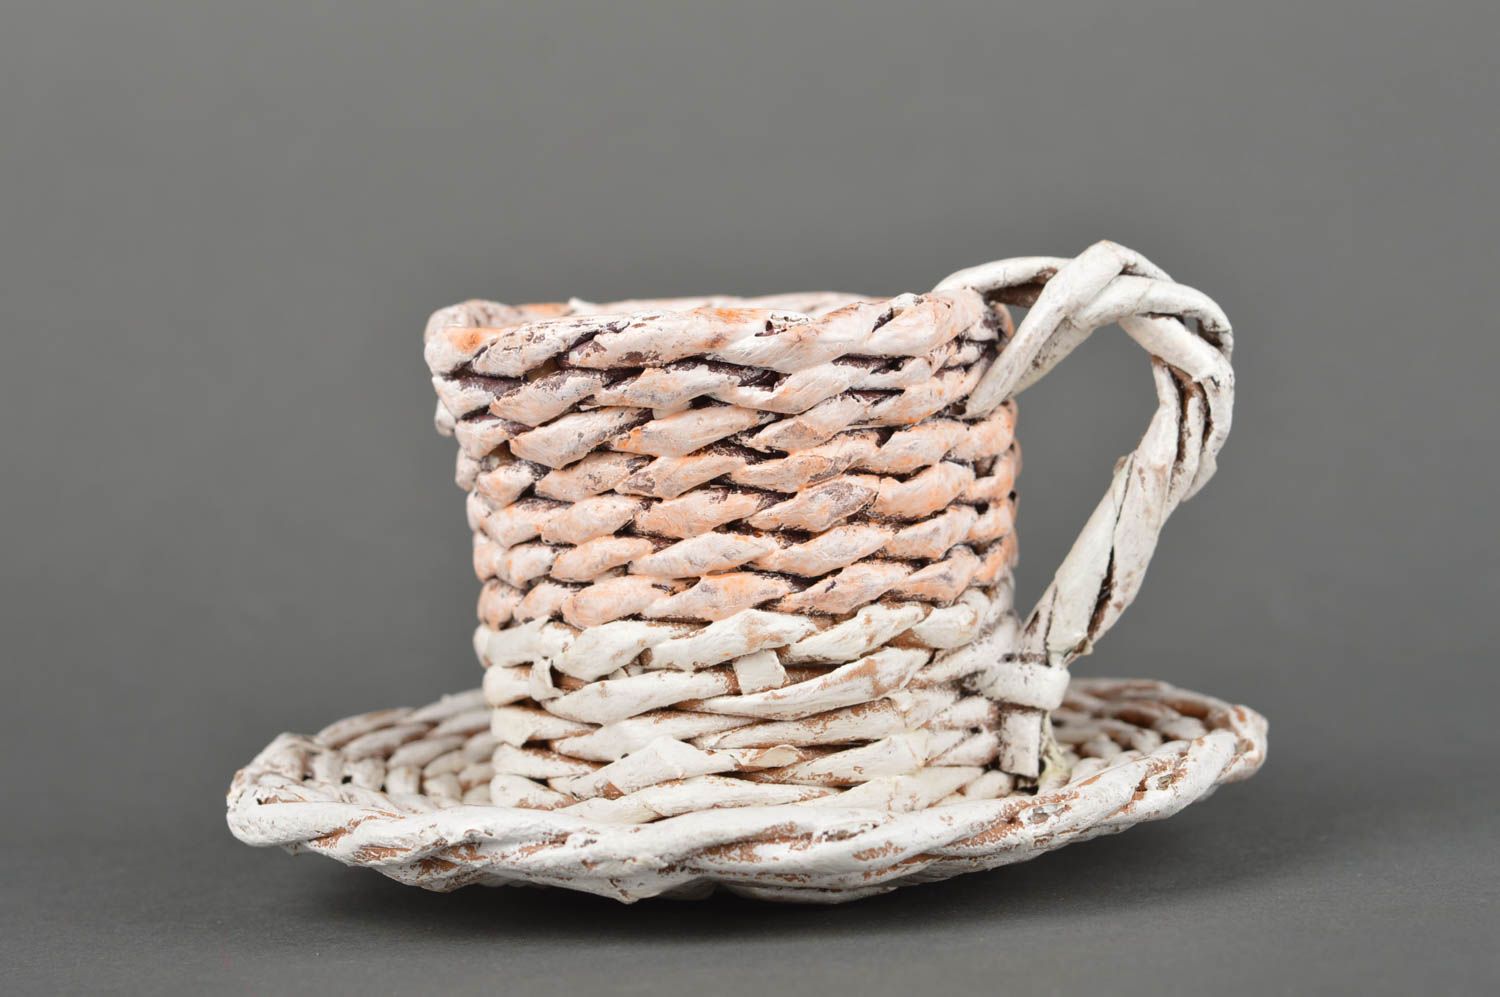 Handmade paper basket woven basket for decorative use only housewarming gifts photo 1